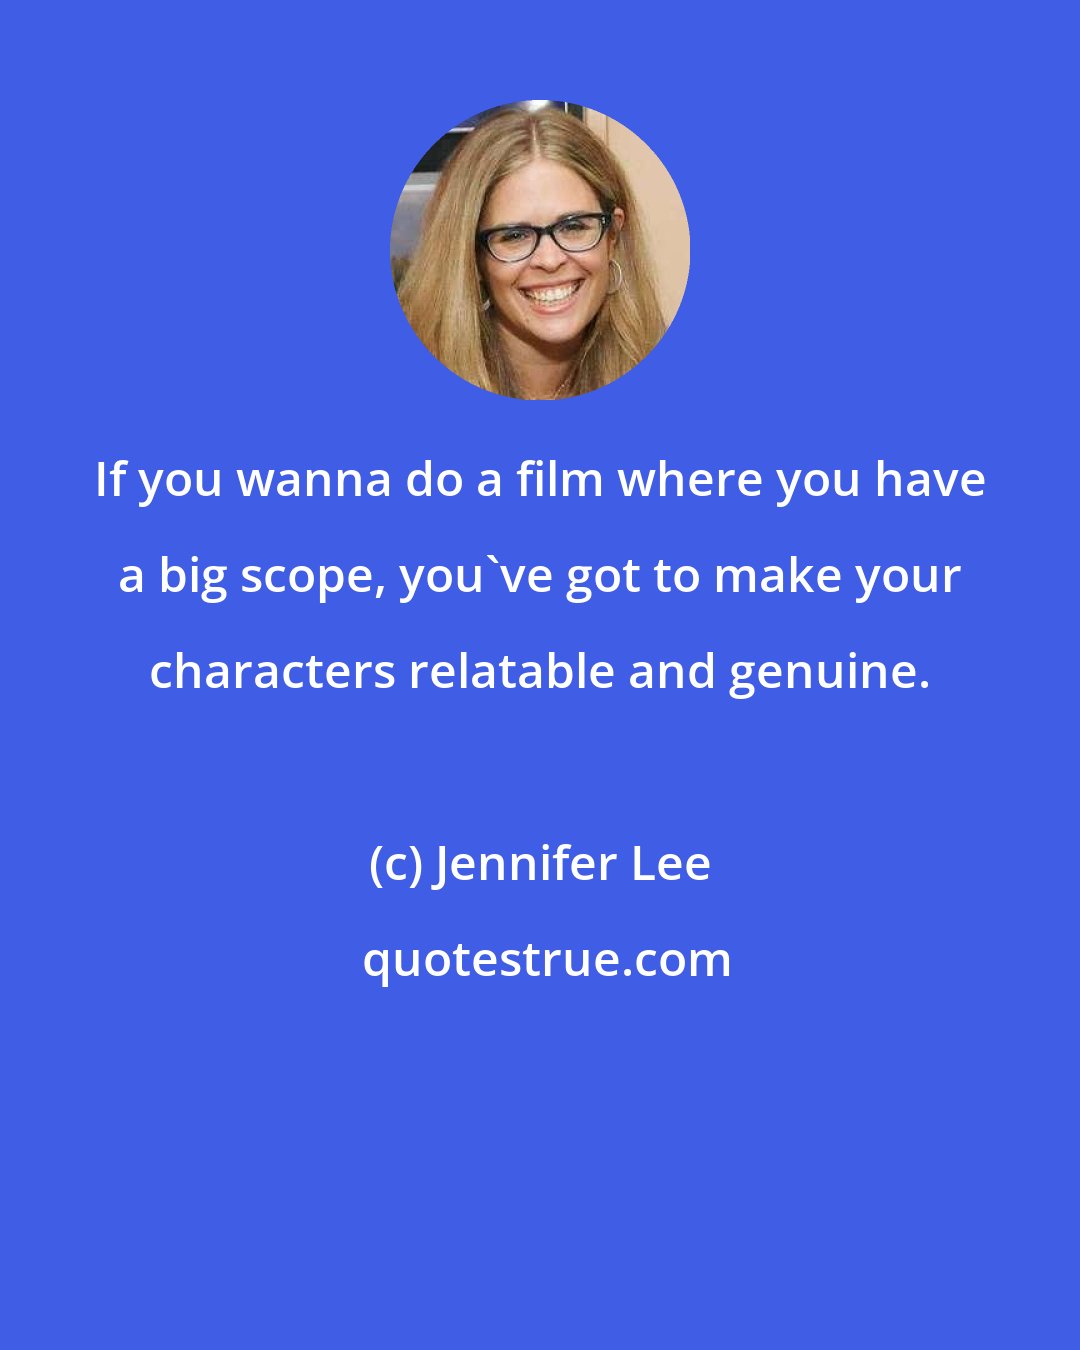 Jennifer Lee: If you wanna do a film where you have a big scope, you've got to make your characters relatable and genuine.